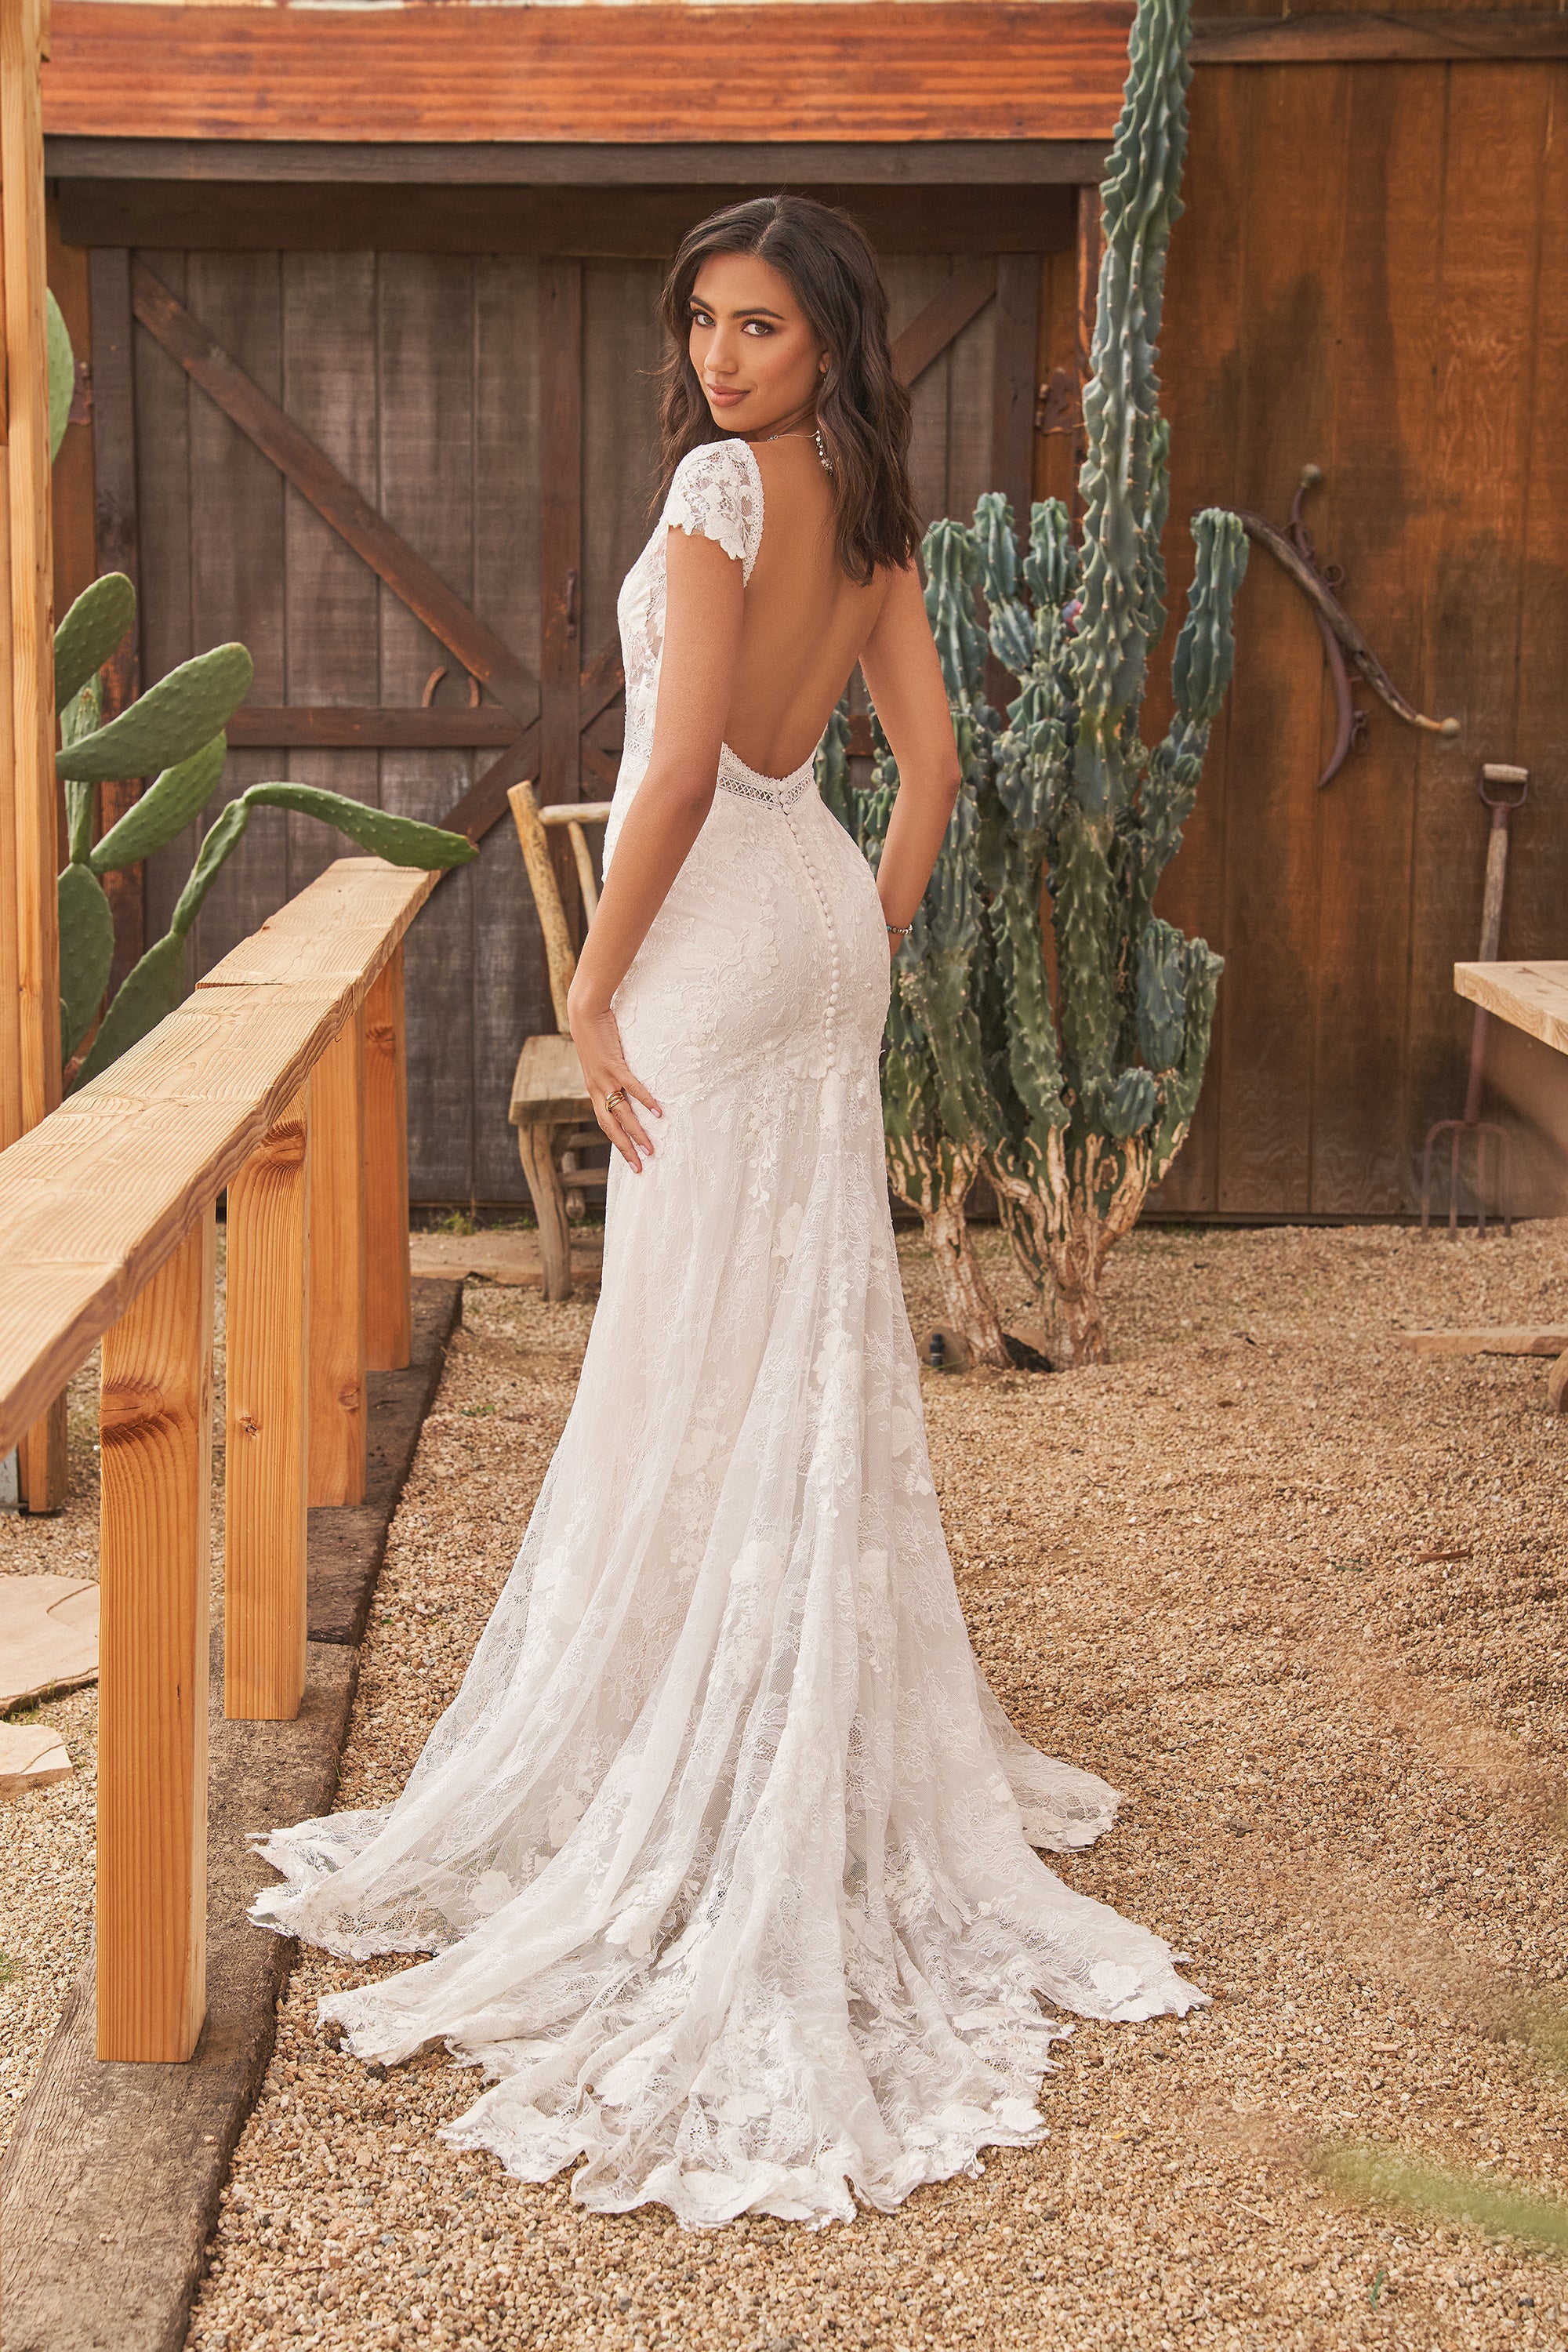 Wilbur - slim fit boho lace wedding dress with short sleeves and backless